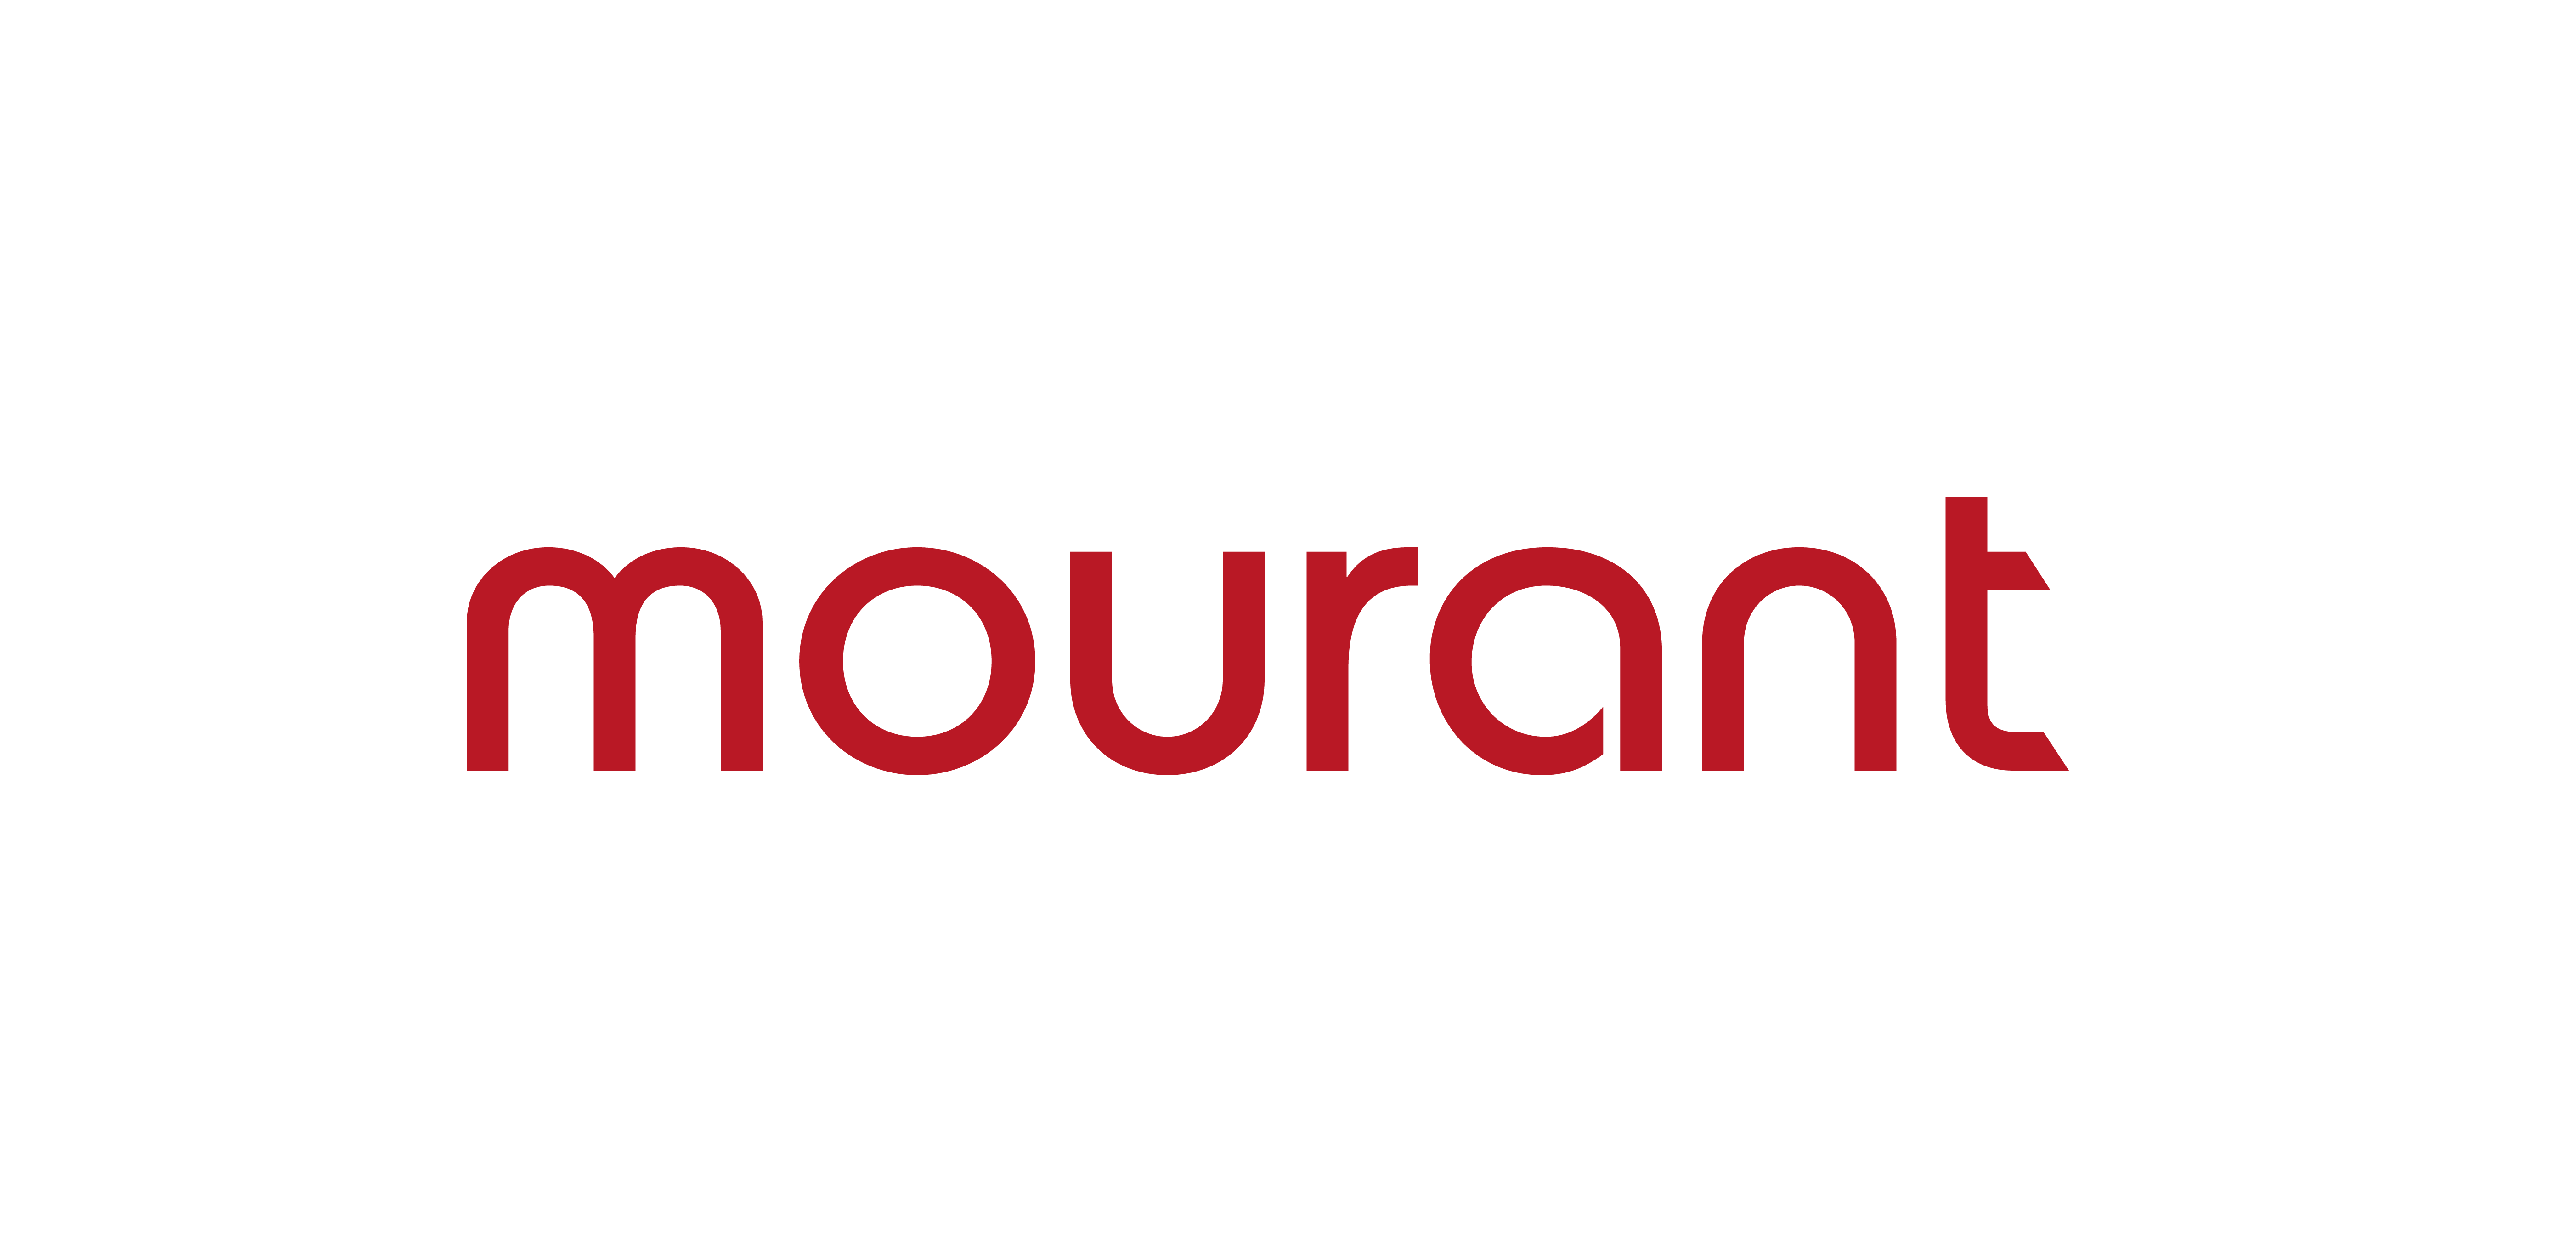 Mourant Logo Red Transparent Background CMYK Small